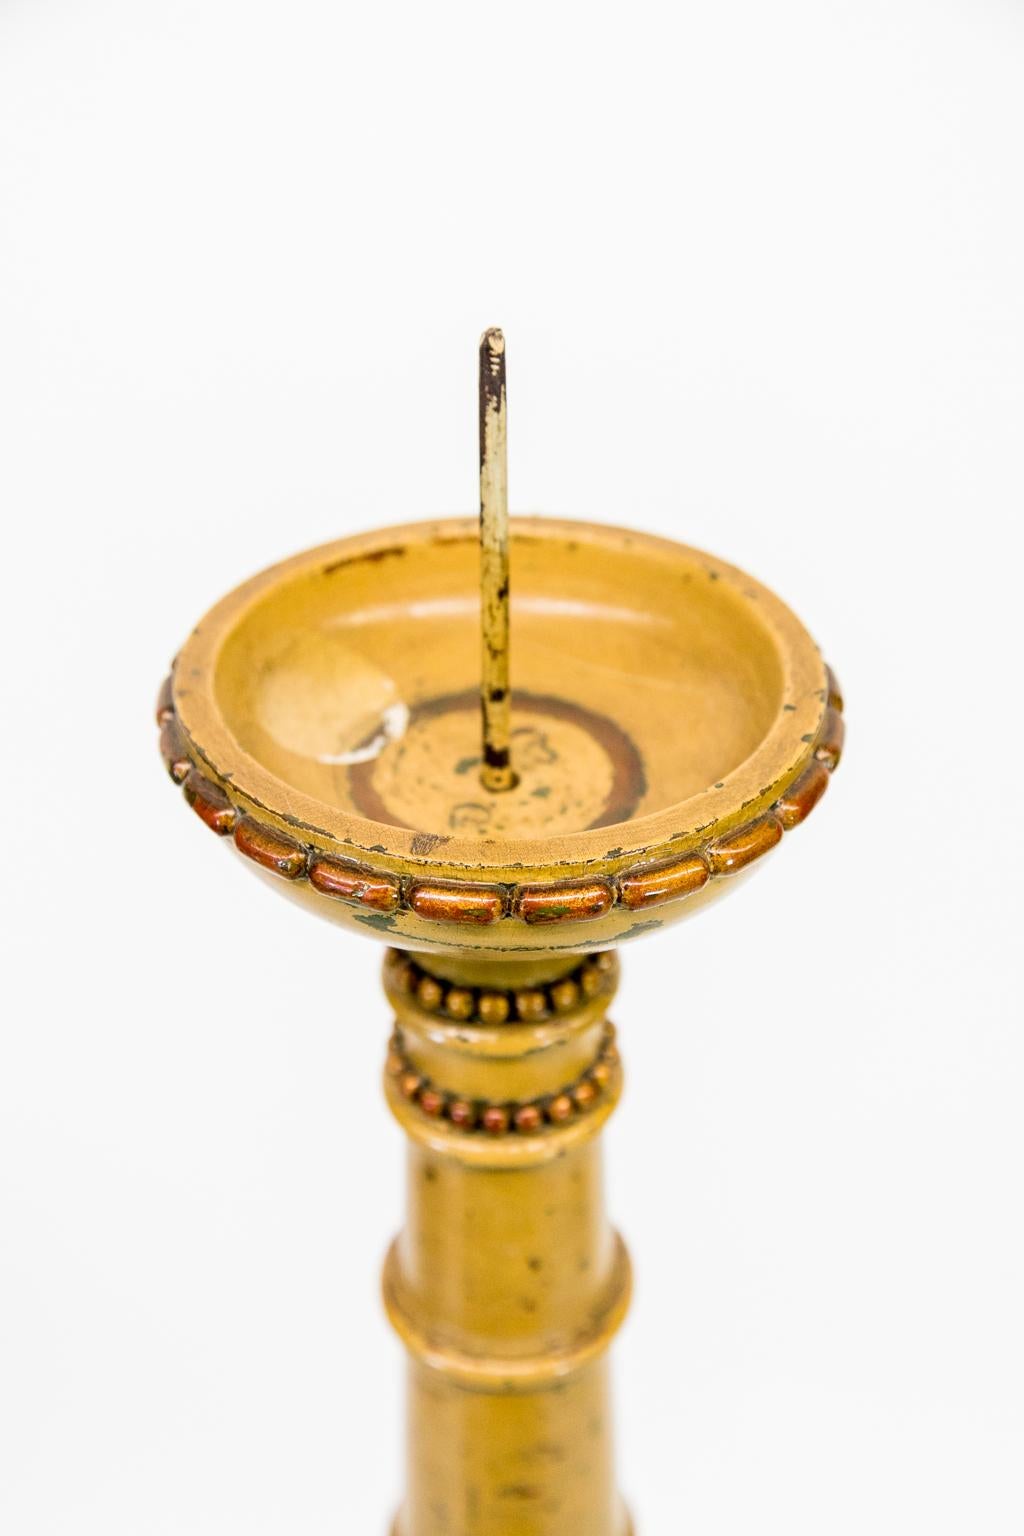 This candlestand has a four-inch steel pricket. The top edge has a repeating capsule border. The upper stem has turned rings and repeating bead carvings that surround the stem. The center of the stem has acanthus leaves carved in high relief. It has